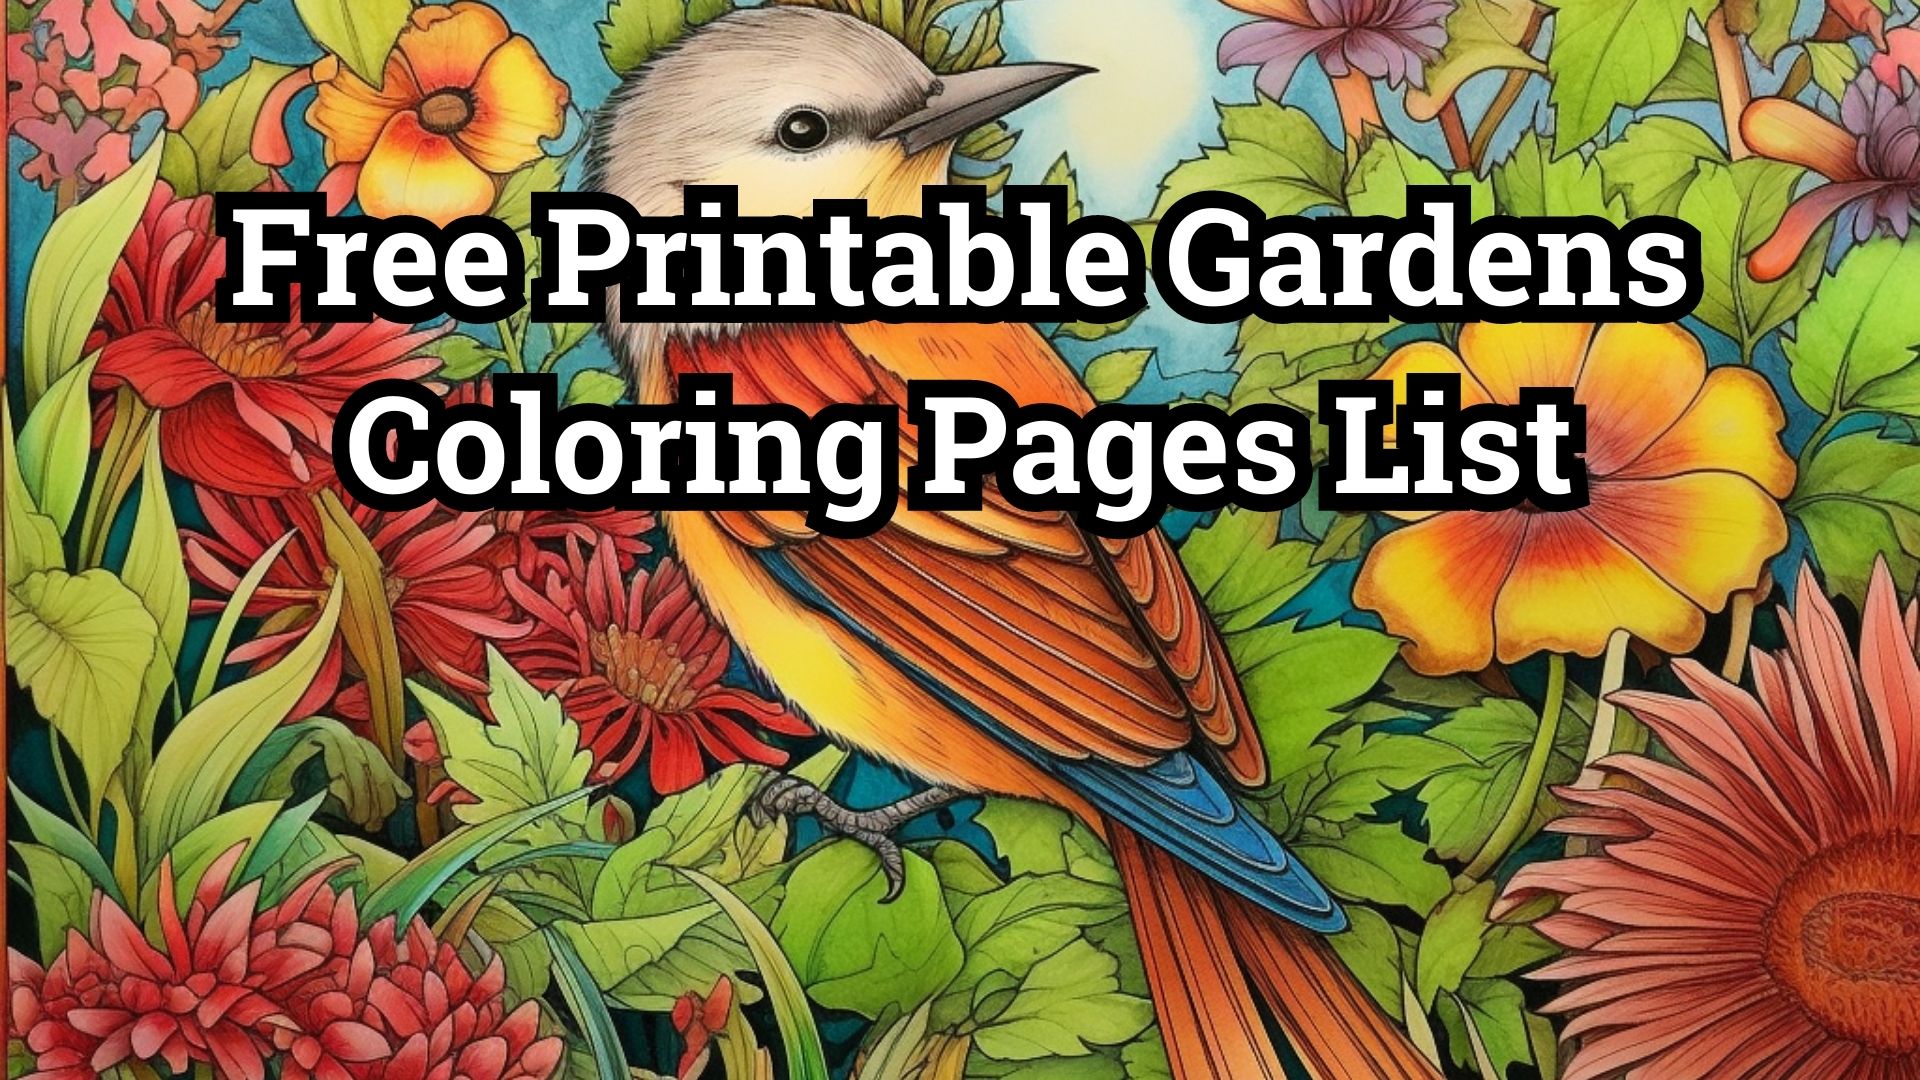 Free Printable Gardens Coloring Pages List